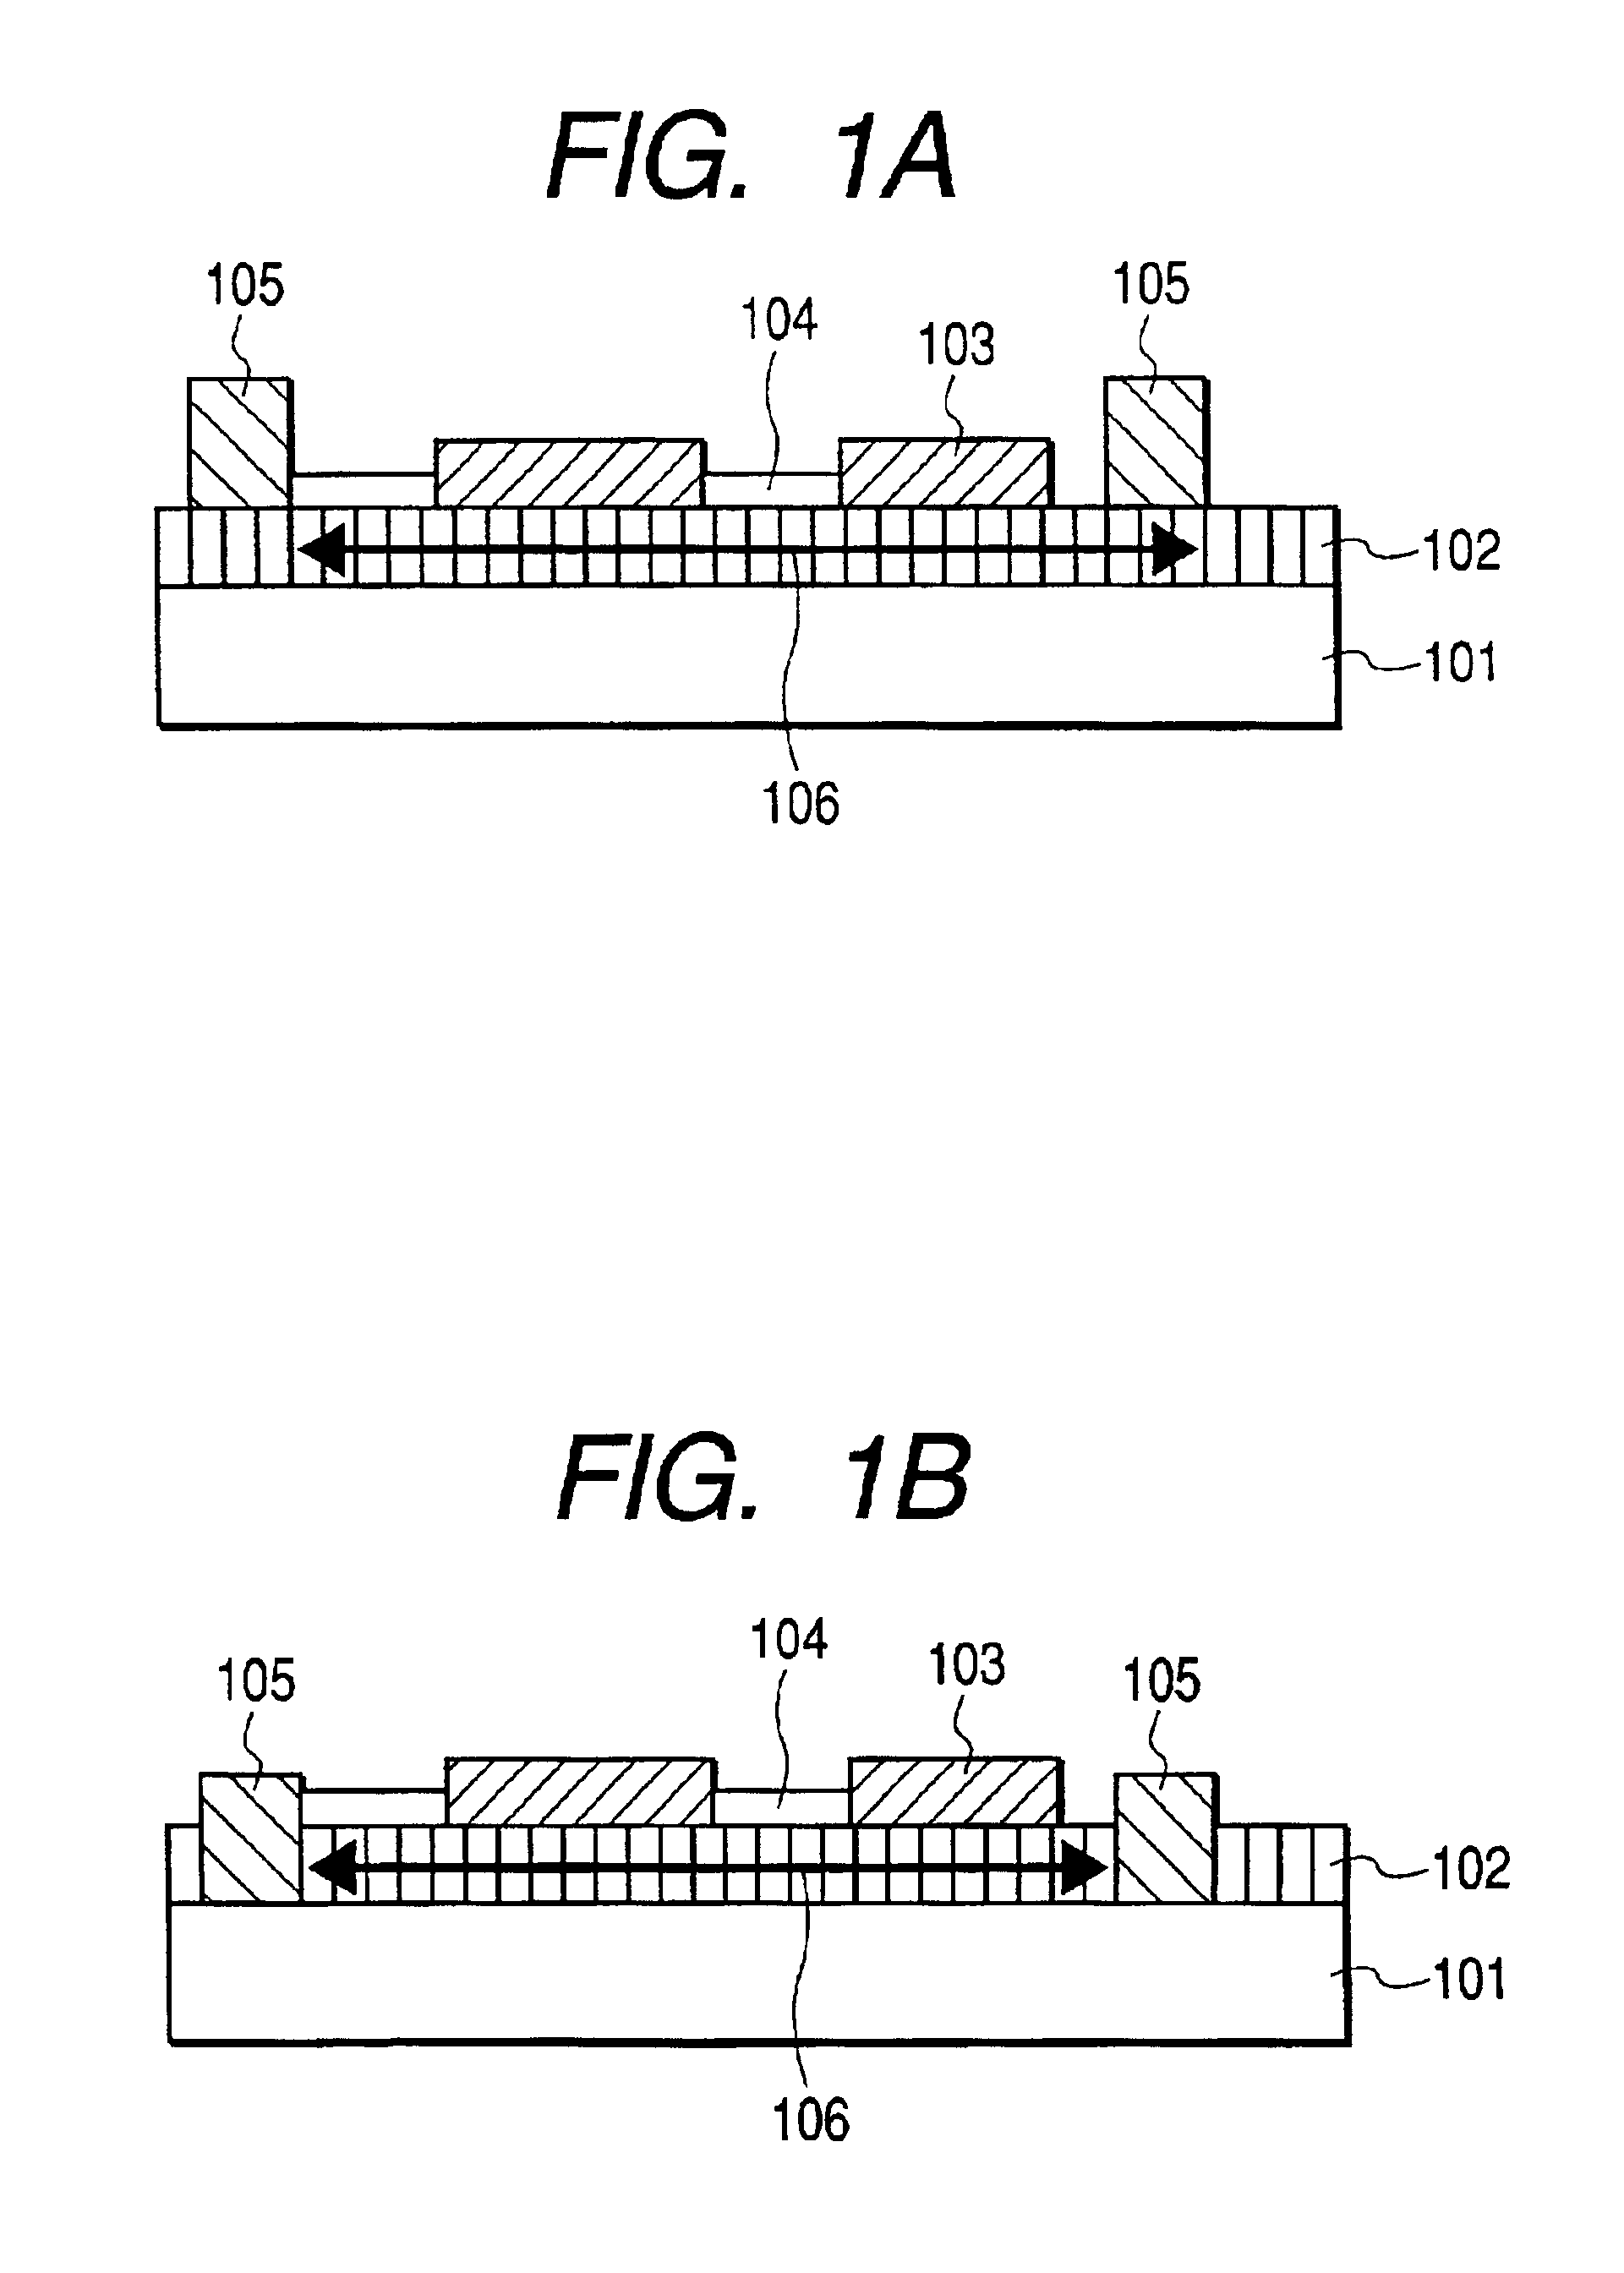 Optoelectronic substrate